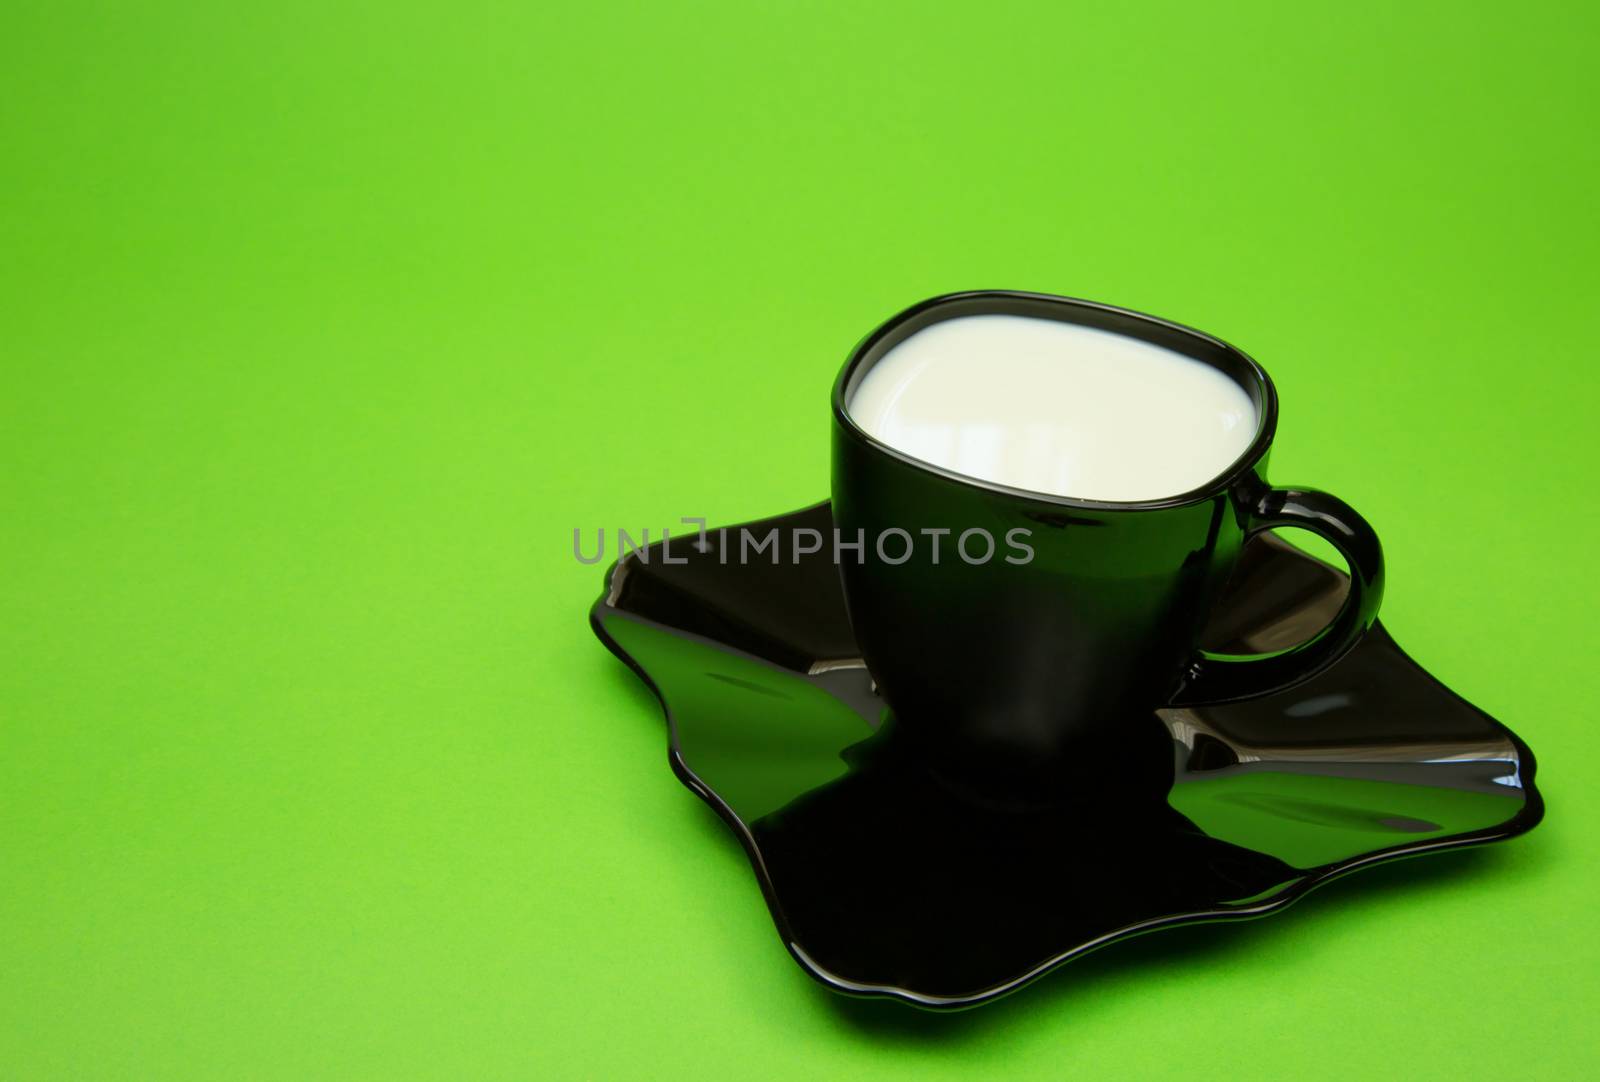 Black cup of milk on a black saucer isolated on a bright green background. Horizontal